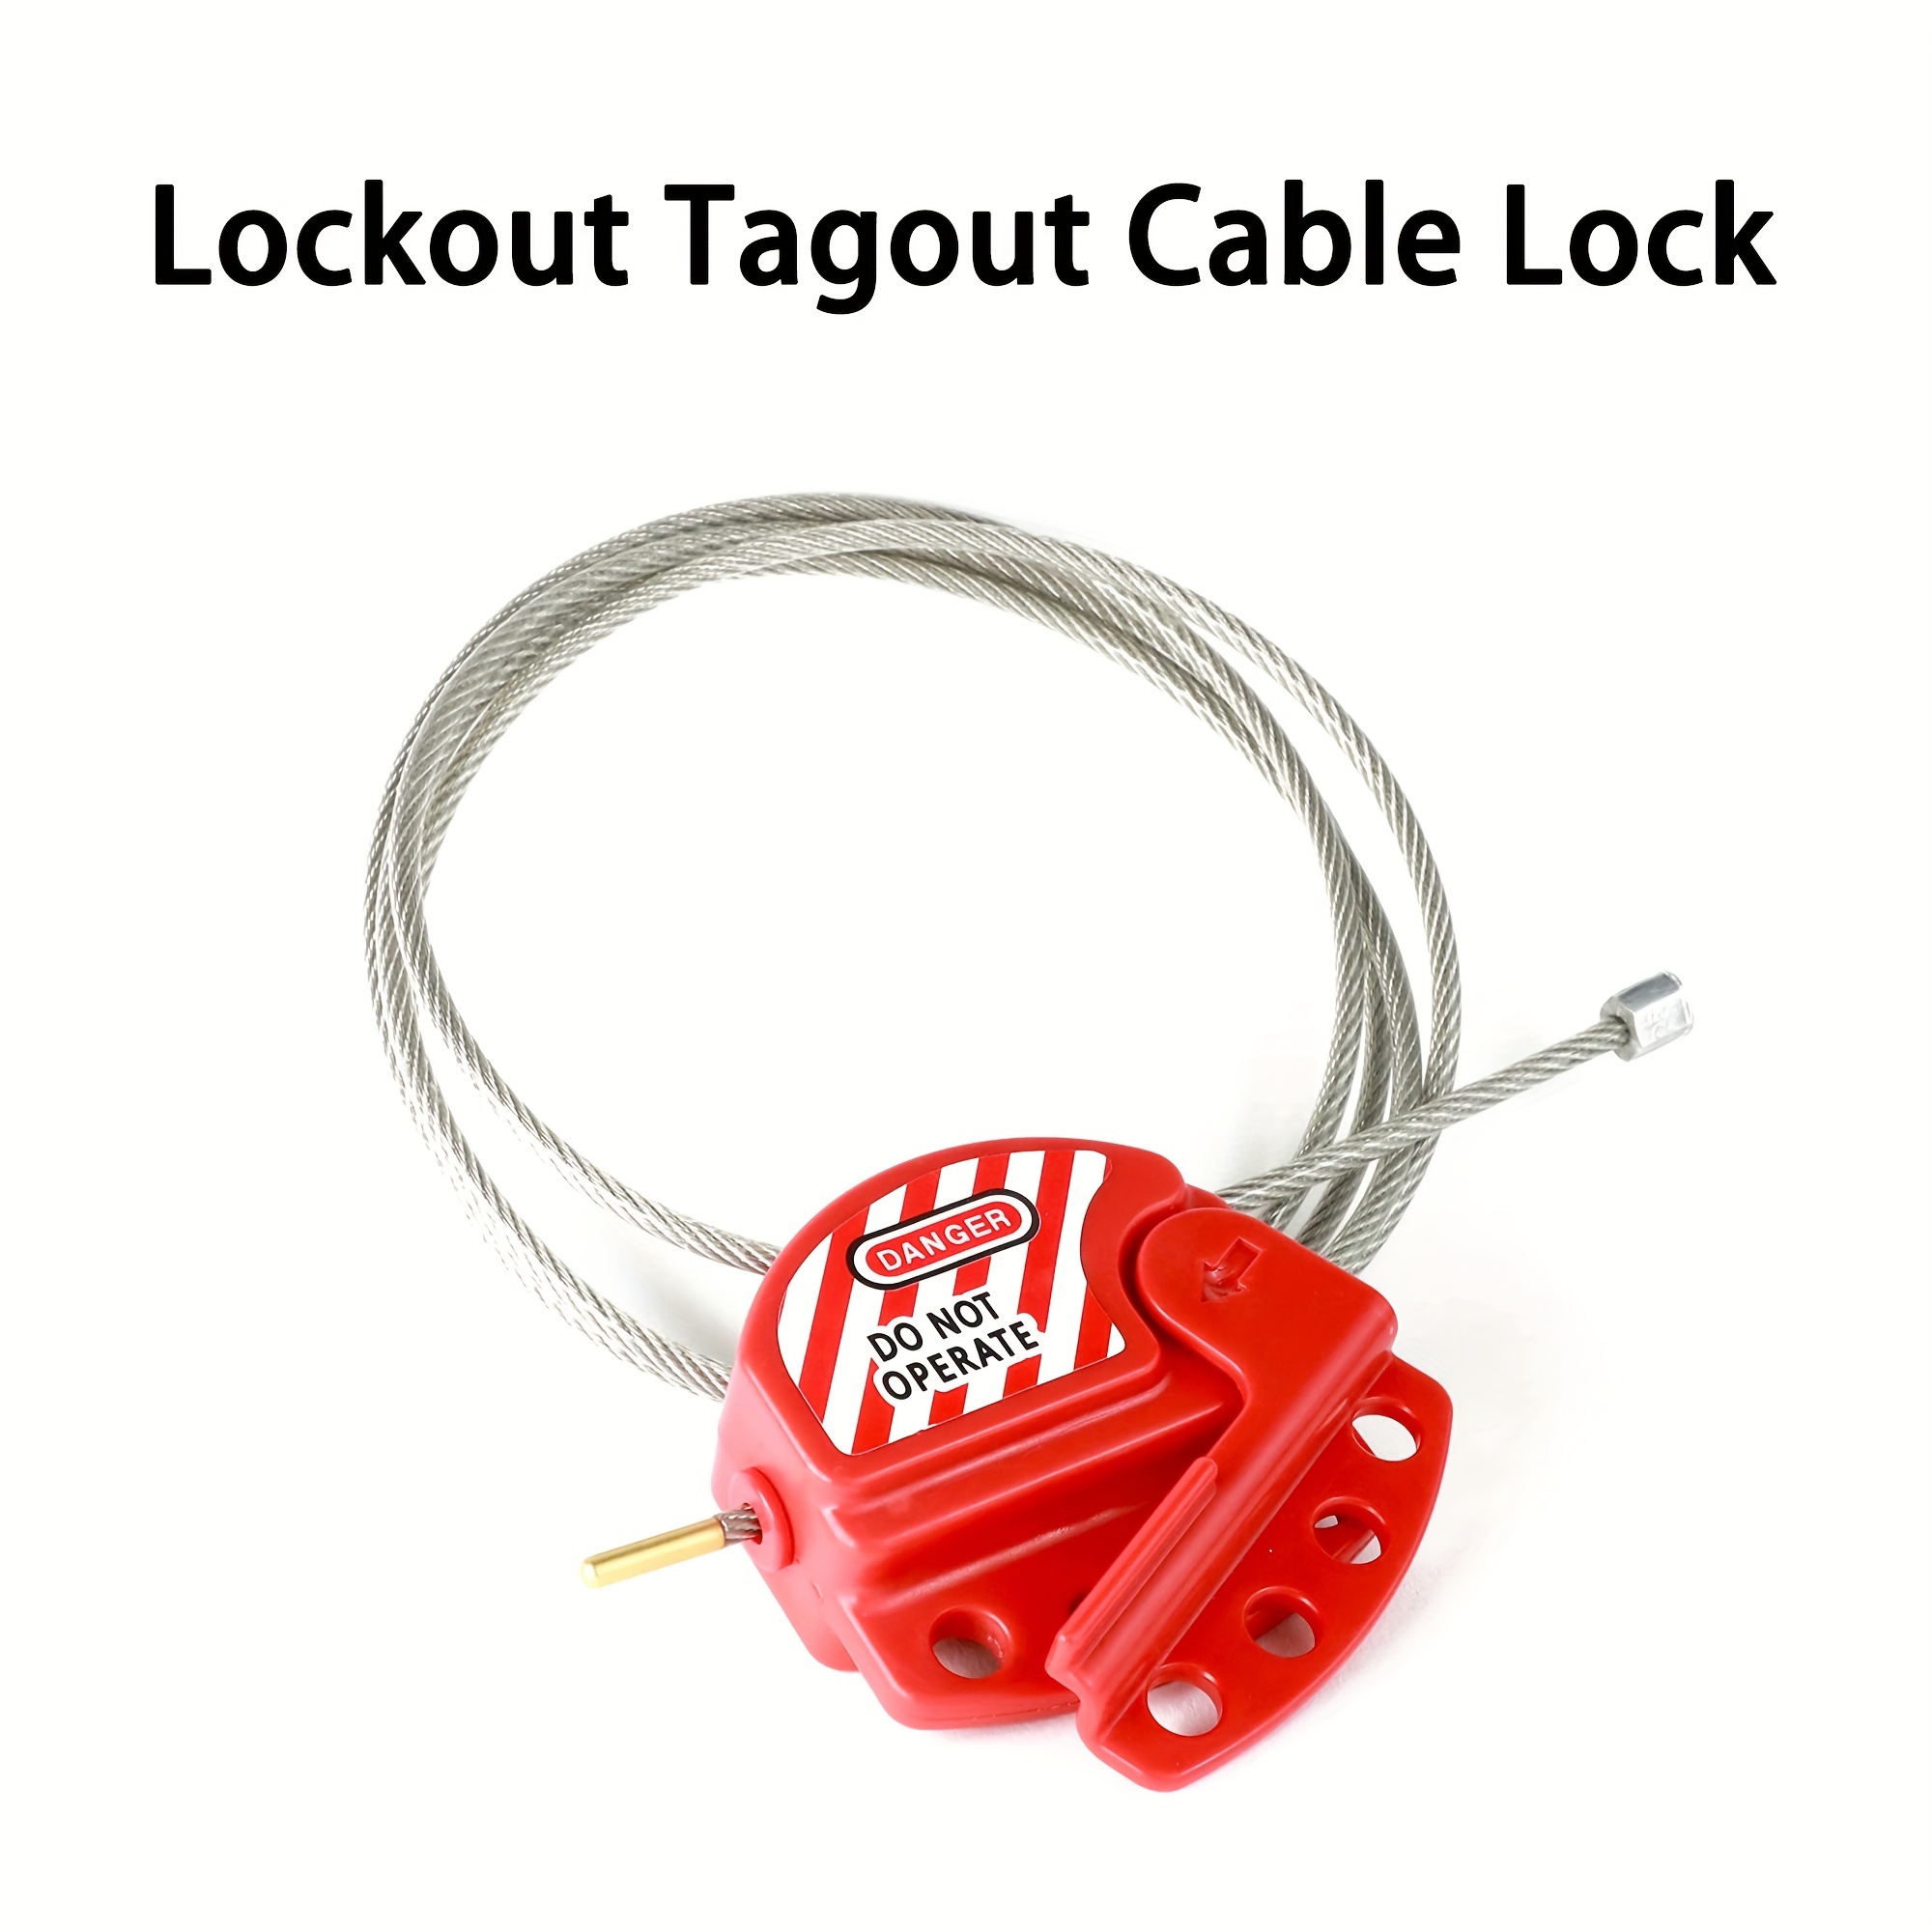 Lockout Tagout Steel Cable Locks With Keys - Red Keyed Alike